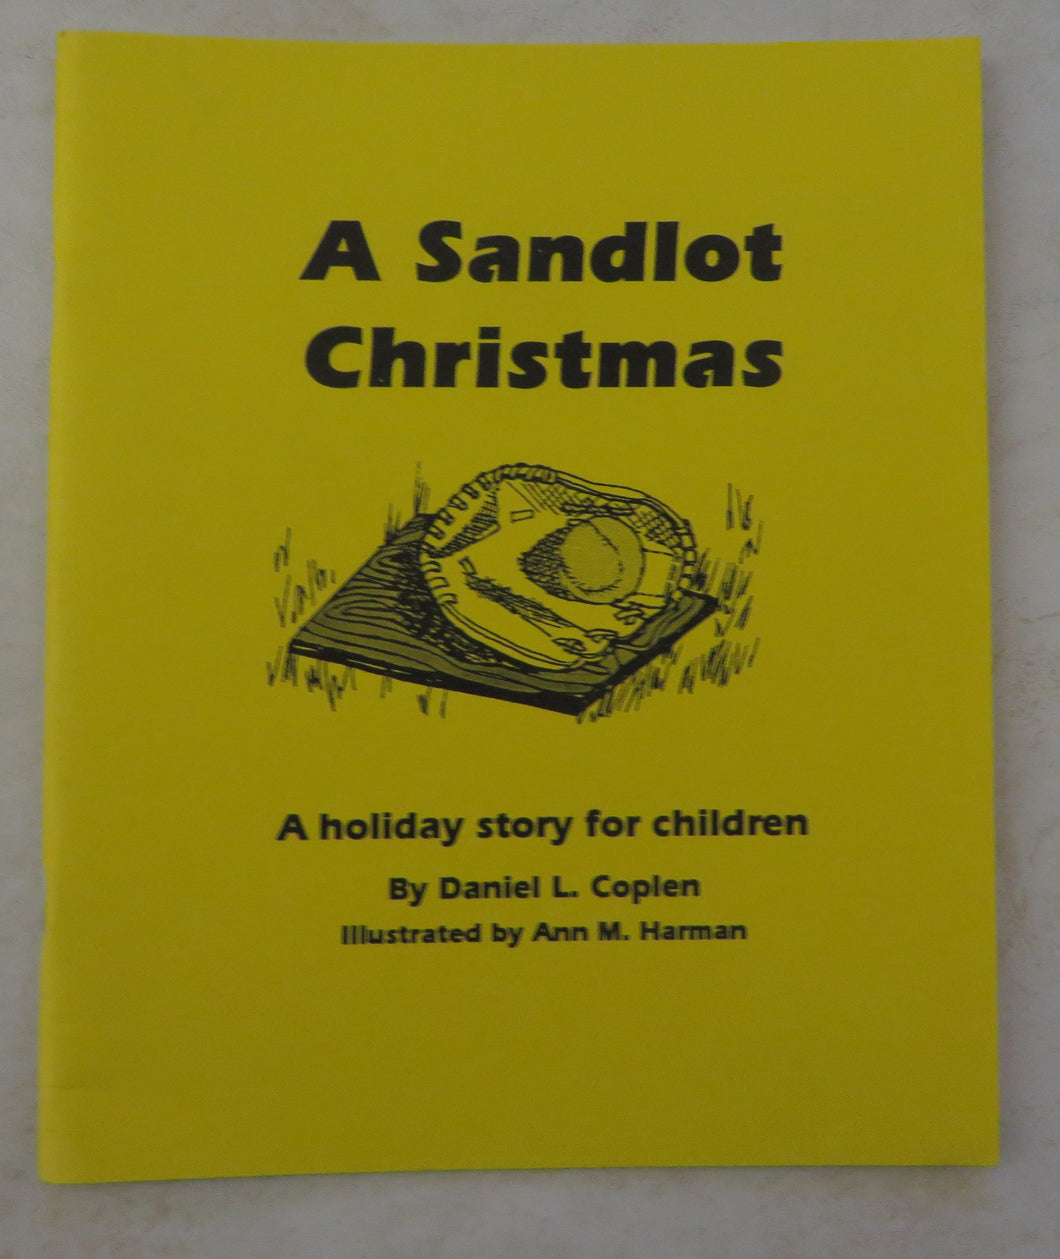 A Sandlot Christmas - A holiday story for children